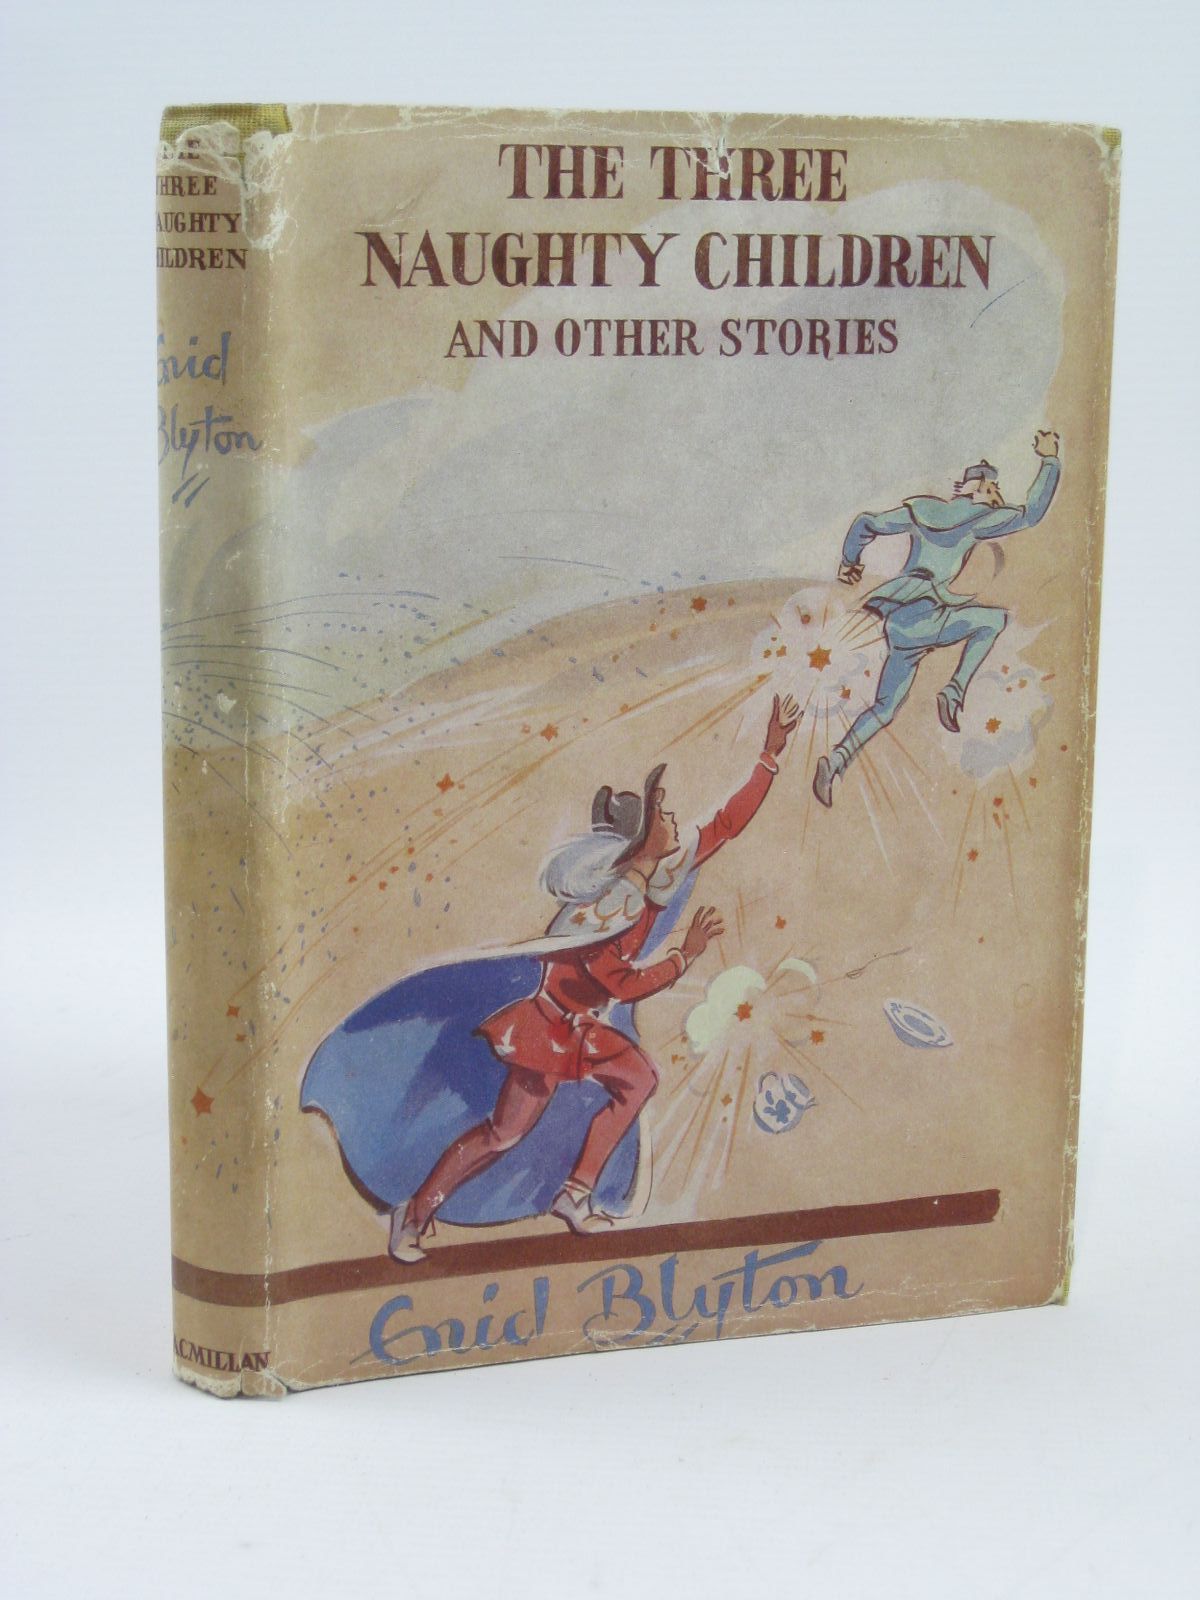 Cover of THE THREE NAUGHTY CHILDREN by Enid Blyton